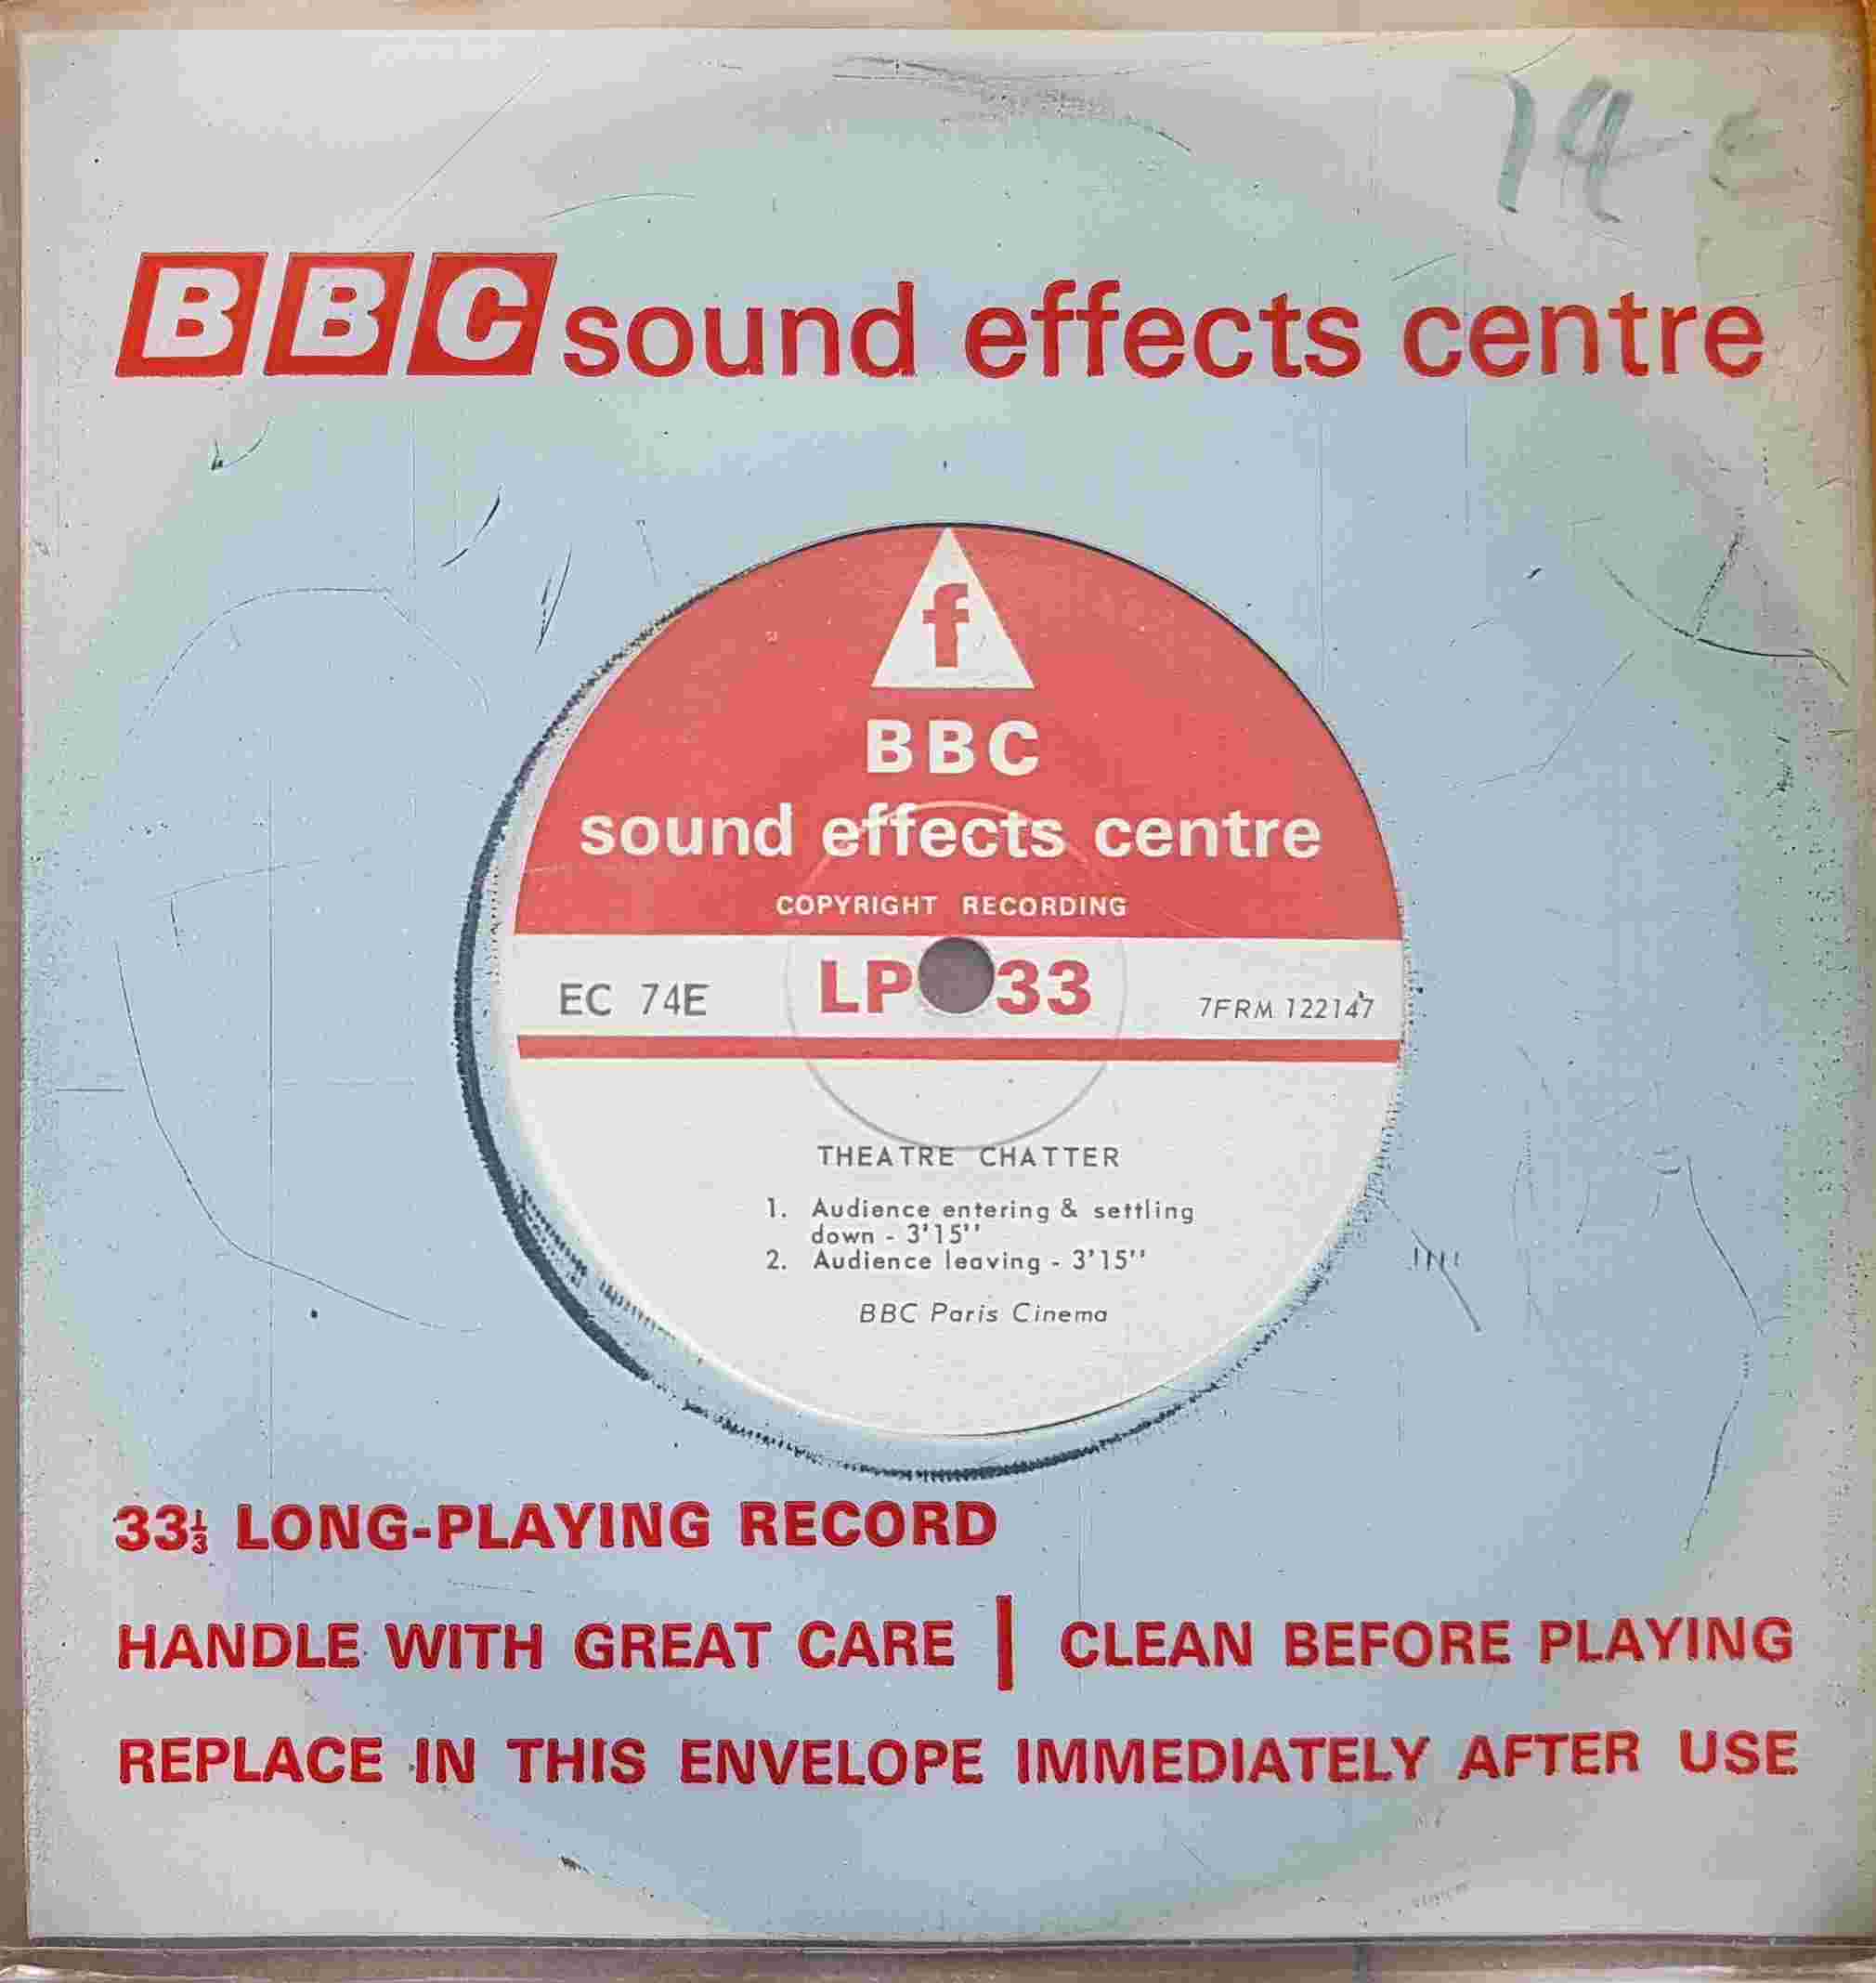 Picture of EC 74E Theatre chatter - BBC Paris Cinema by artist Not registered from the BBC singles - Records and Tapes library